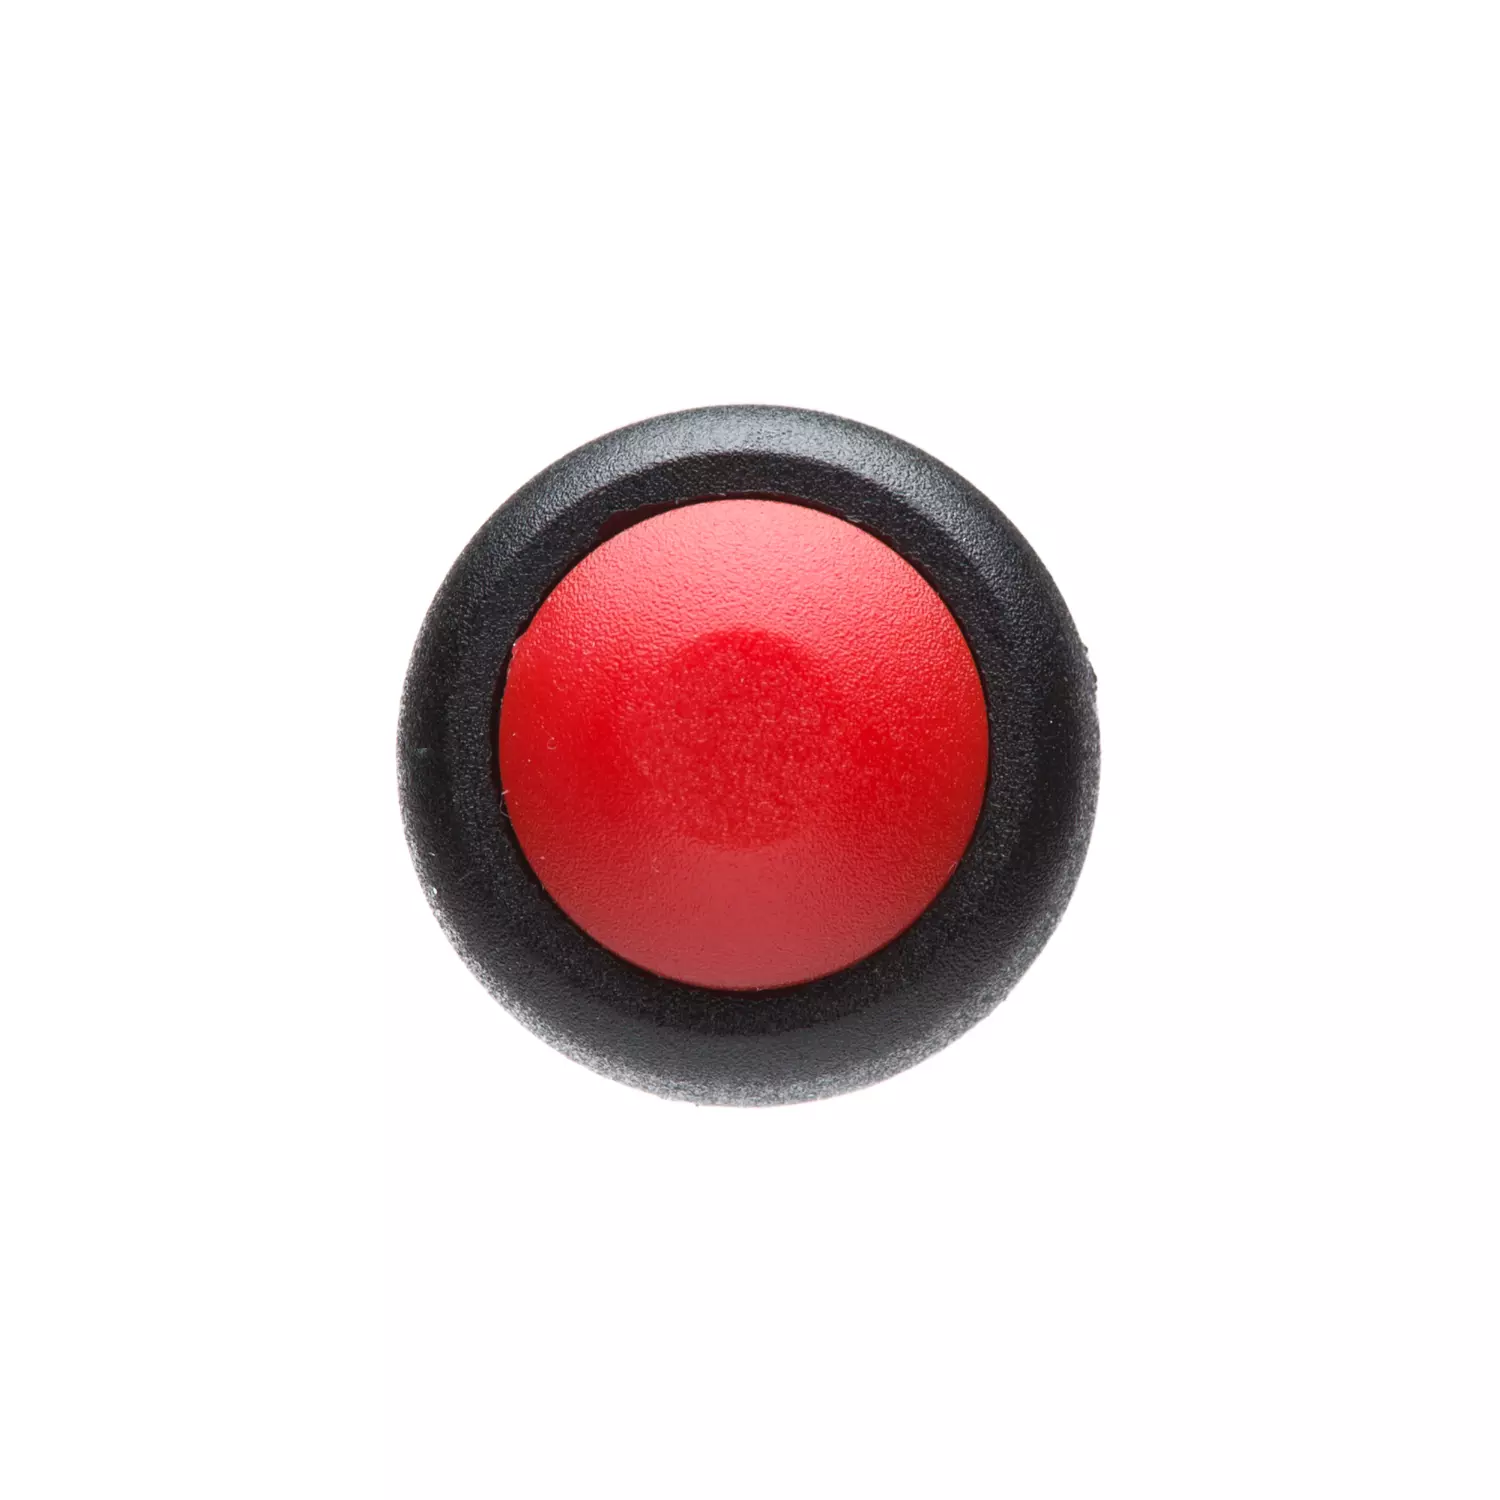 Photo of 12mm Momentary Push Button Dome - Red